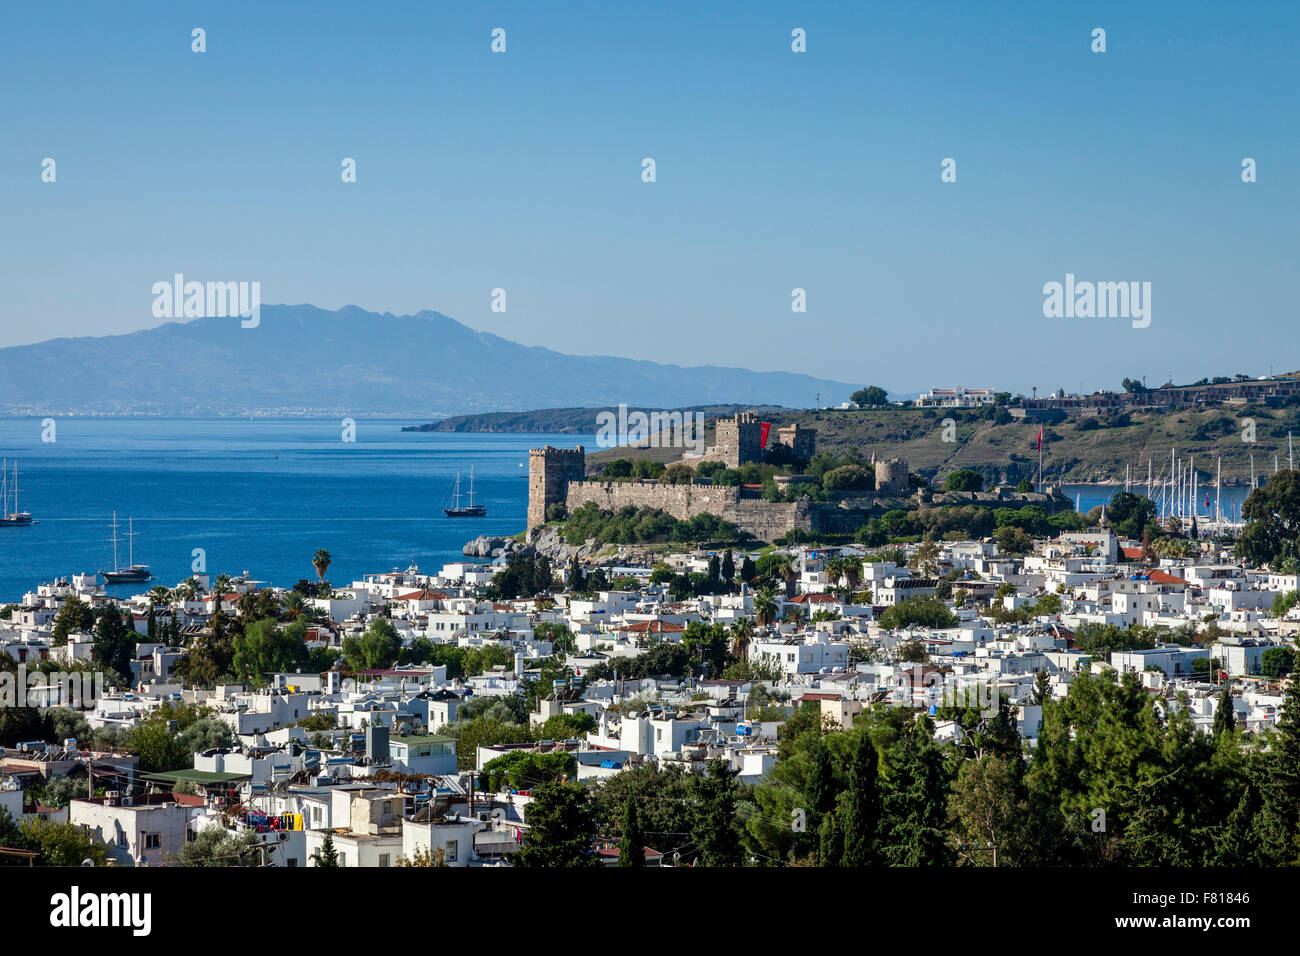 An Elevated View of The City of Bodrum with the Greek Island of Kos in the Backround, Mugla Province, Turkey, Stock Photo